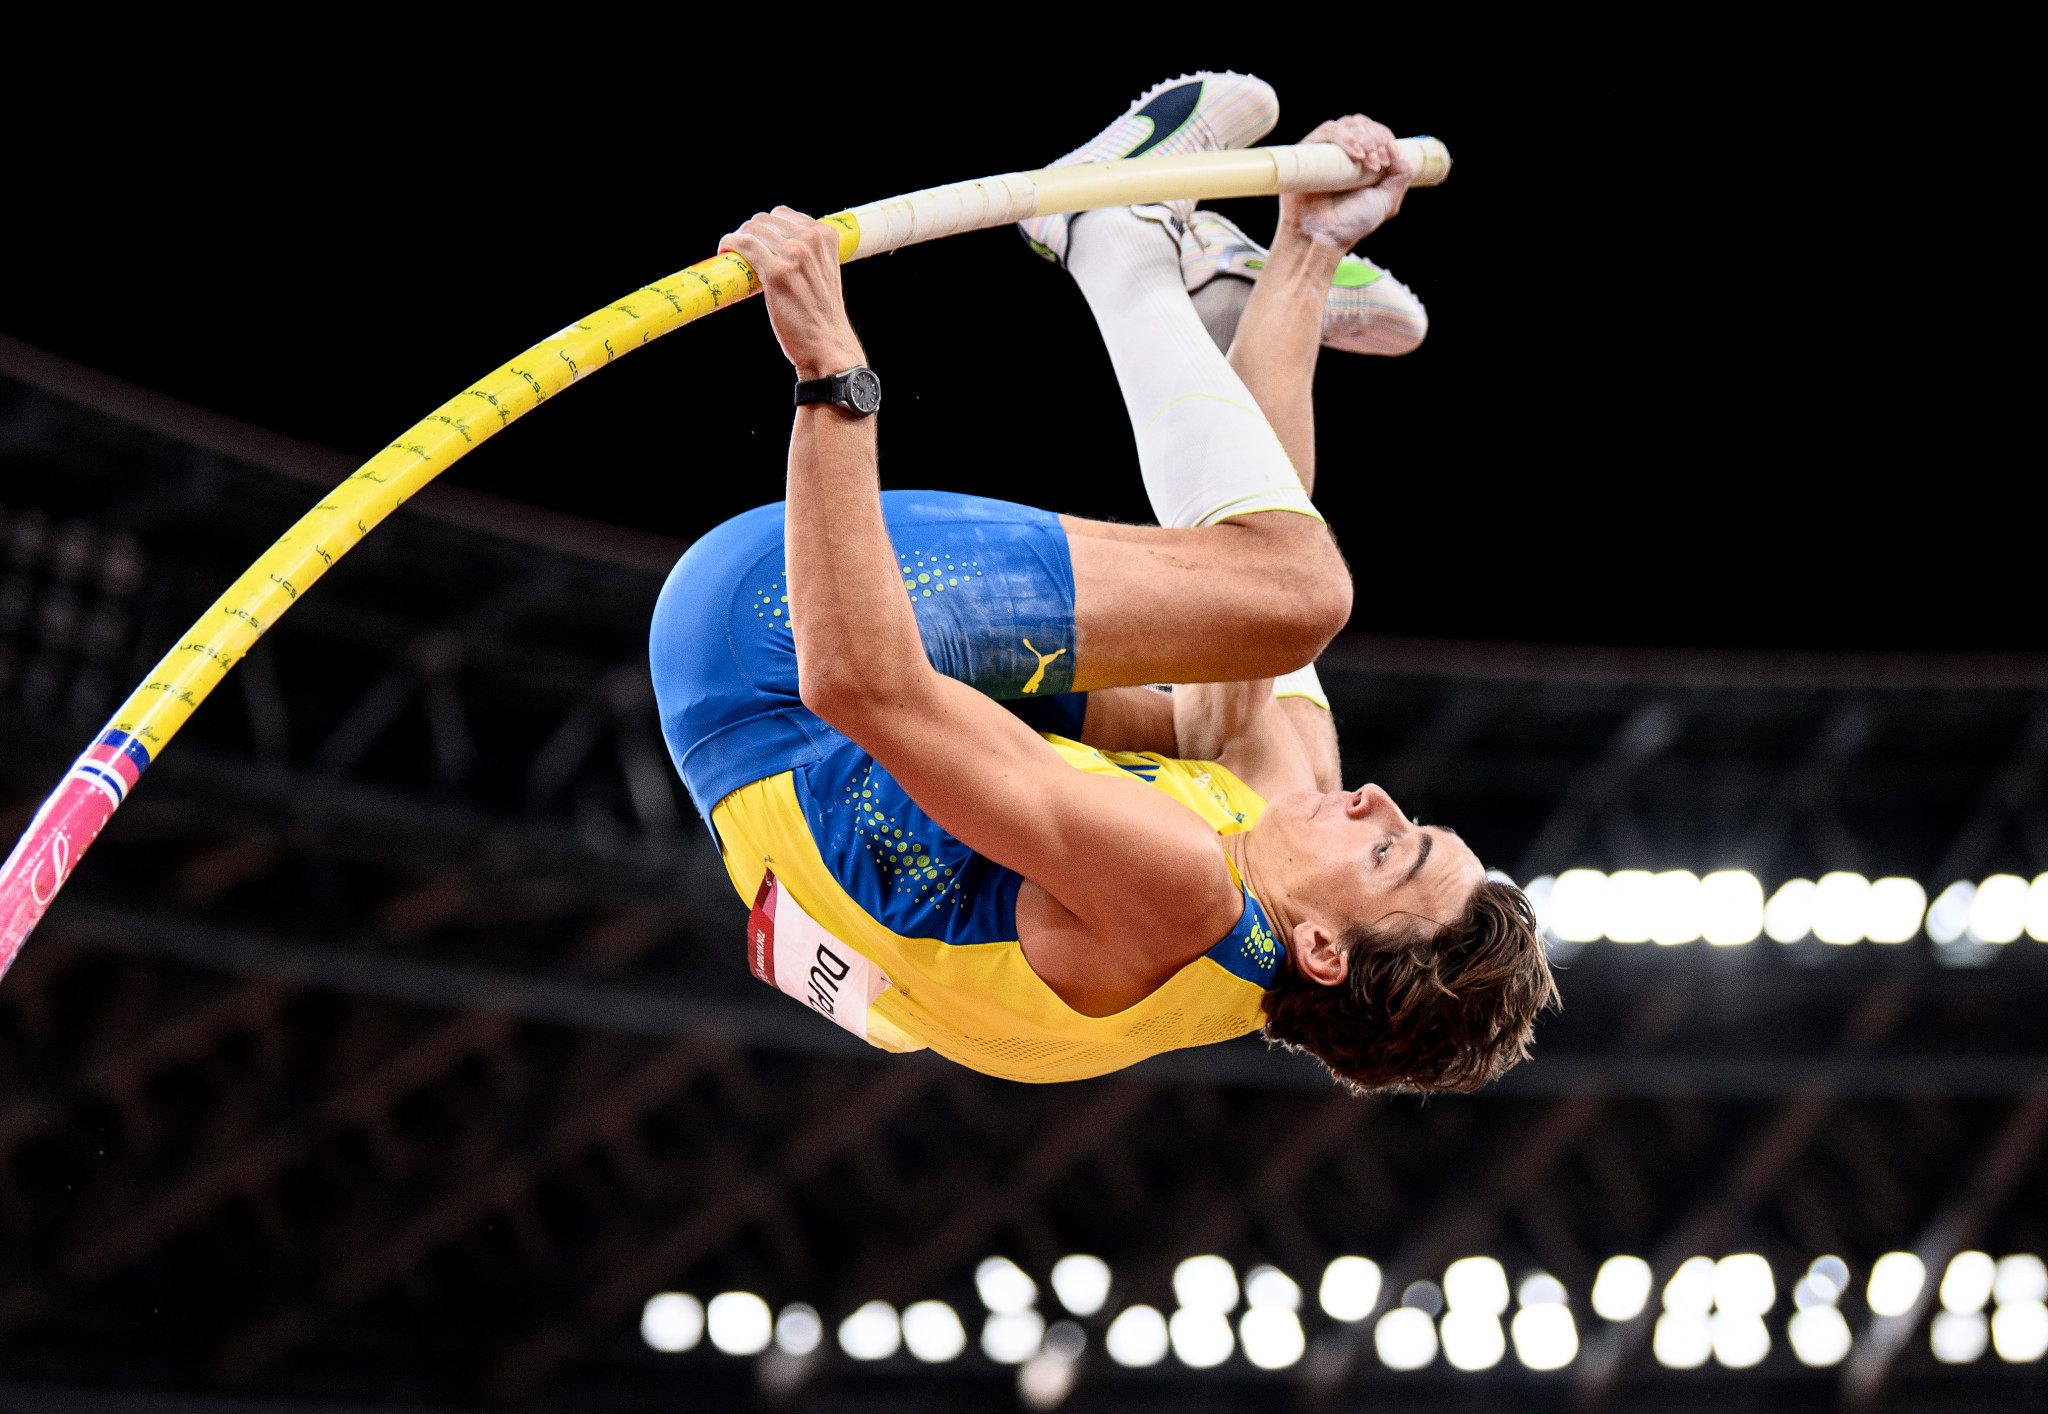 Pole vaulter Armand Duplantis was one of Sweden's three gold medallists at Tokyo 2020 ©Getty Images